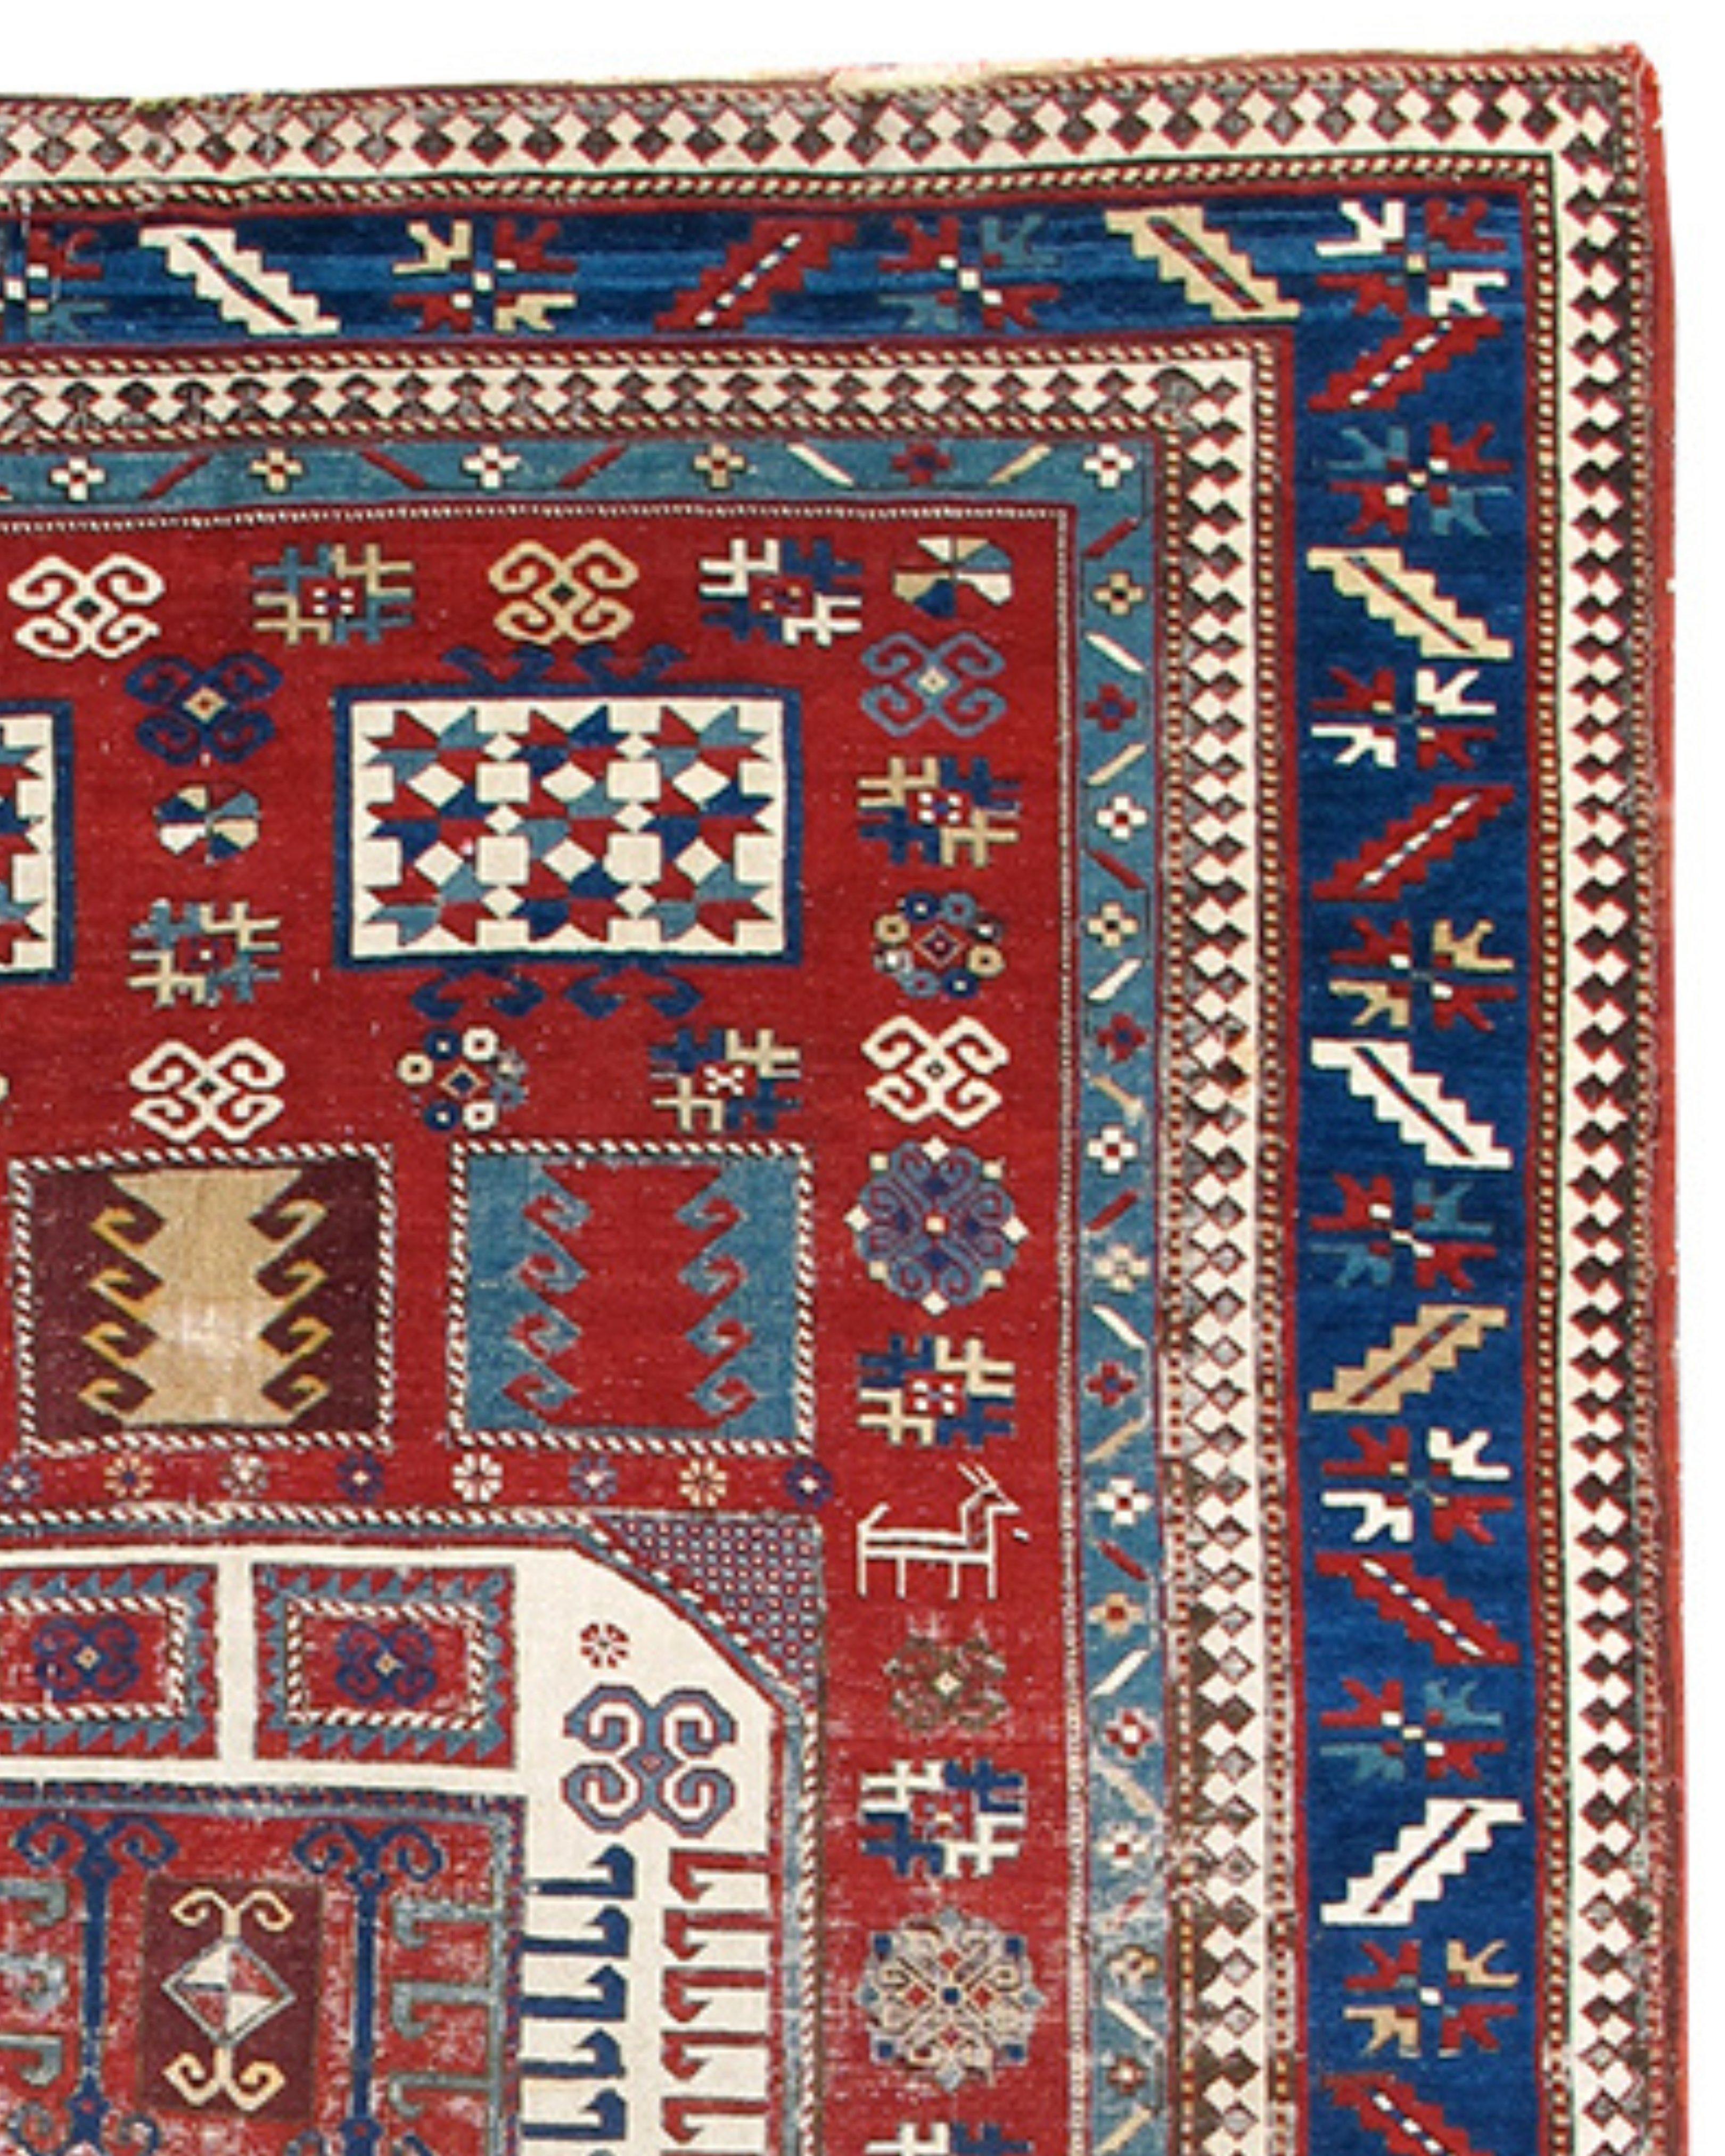 Antique Karachopf Kazak Rug, Late 19th Century

The madder field with a central rectangular medallion within an indigo serrated leaf and rosette border.

Additional Information:
Dimensions: 5'7